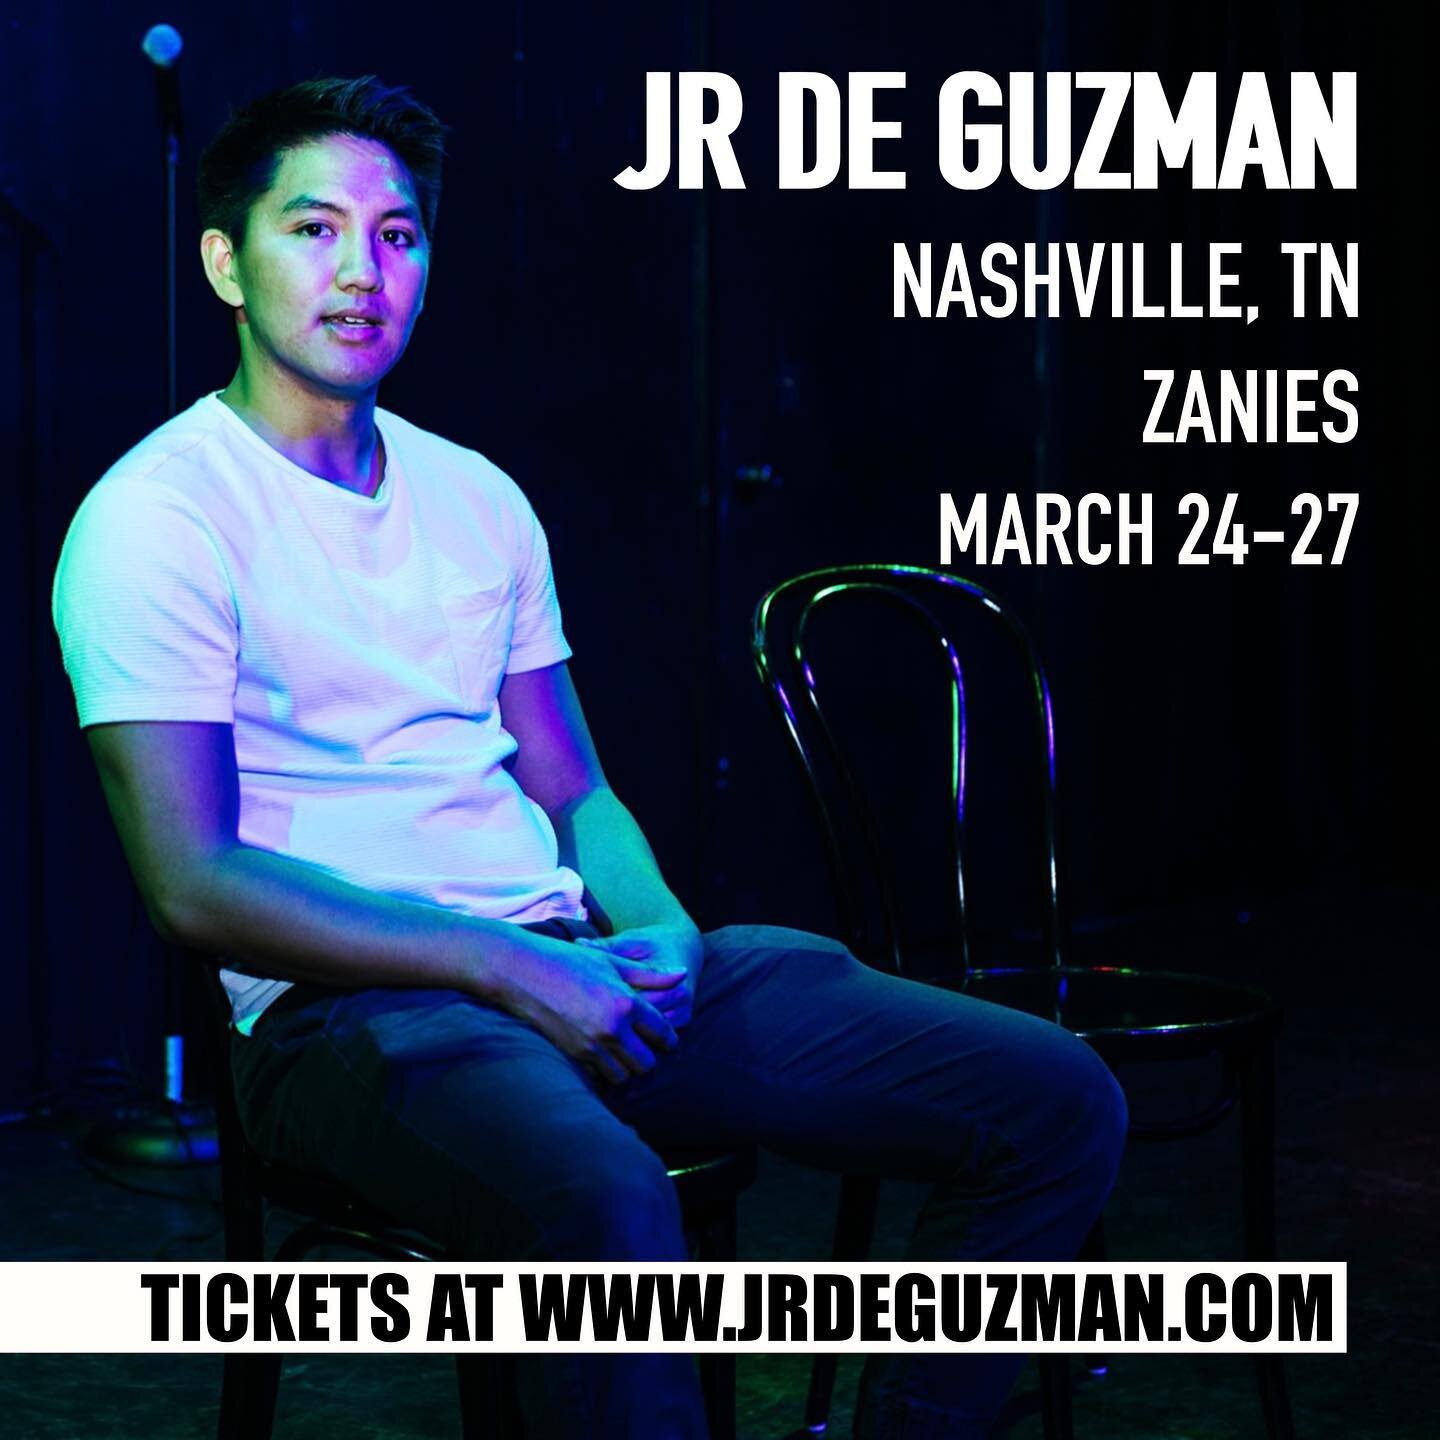 NASHVILLE, TN &mdash; MARCH 24-27!!
Tag your Nashville friends and family below! 
Link to tickets in bio - see you there!
Hugs and kisses,
JR 

#nashvillecomedy #zaniesnashville #nashvilletennessee